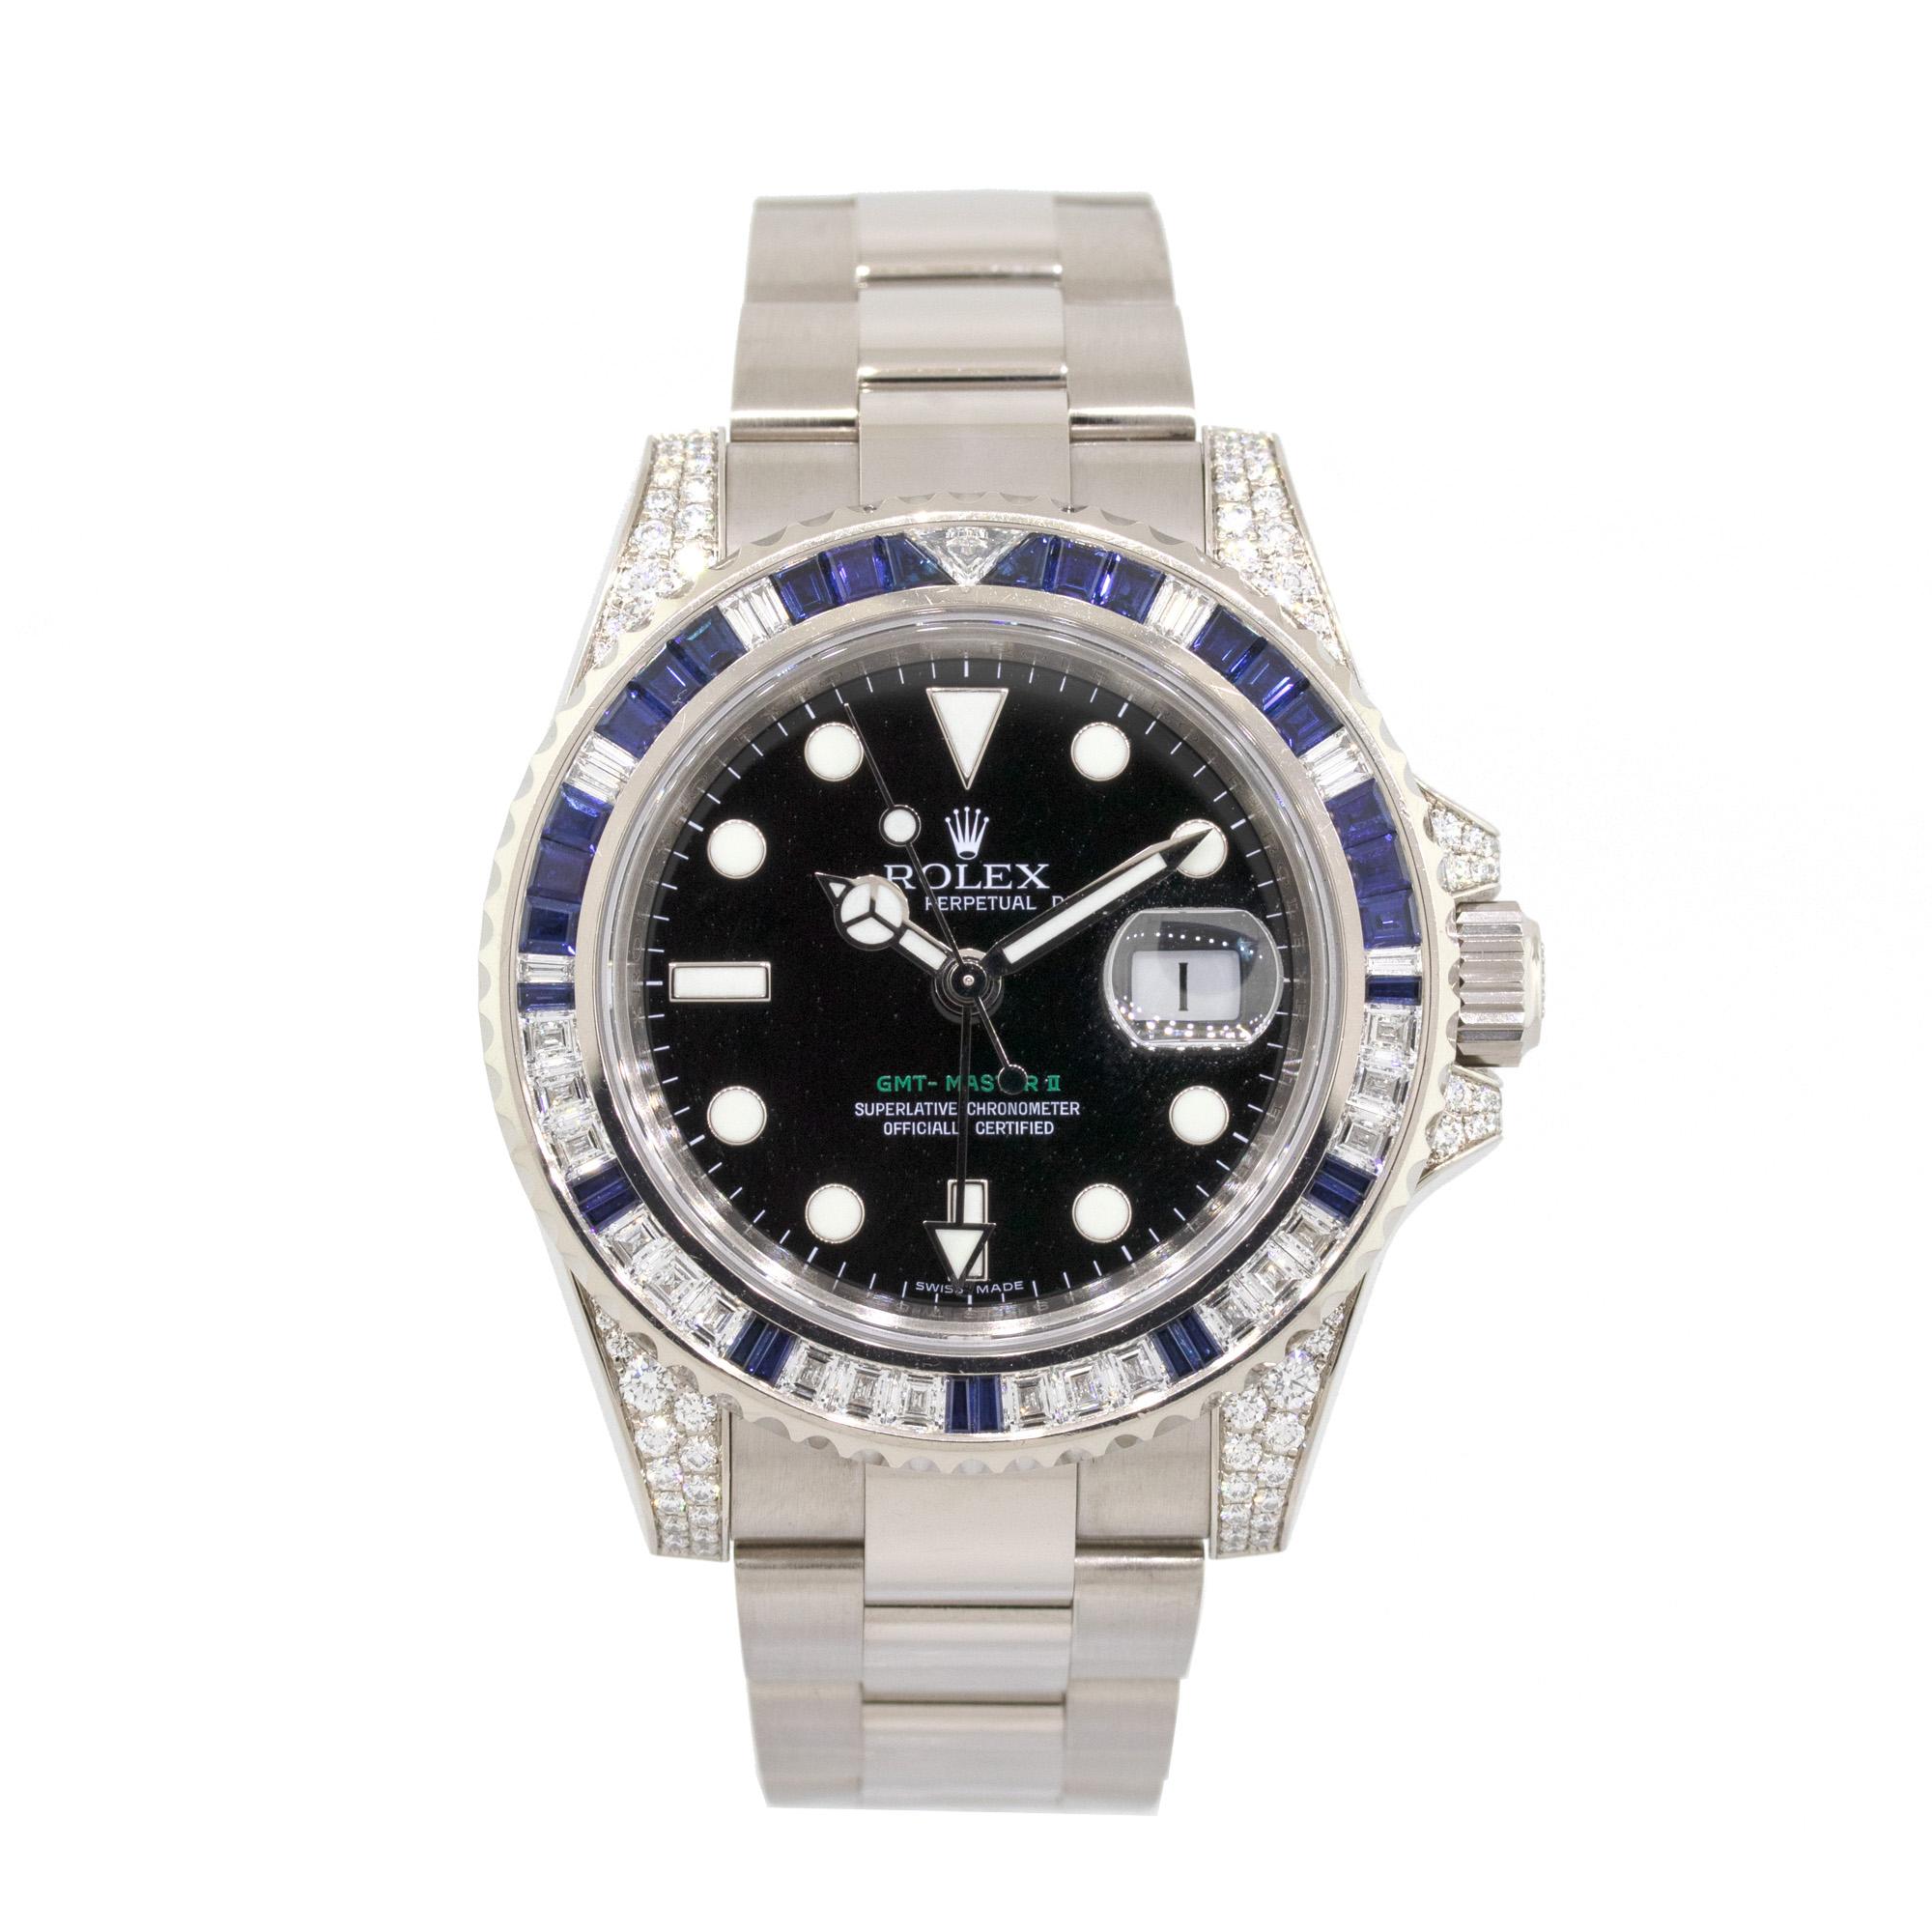 Brand: Rolex
MPN: 116759SA
Model: GMT-Master II
Case Material: 18k White gold
Case Diameter: 40mm
Crystal: Sapphire crystal
Bezel: Factory unidirectional Sapphire and Diamond Bezel
Dial: Black dial with luminescent hour markers and hands
Bracelet: